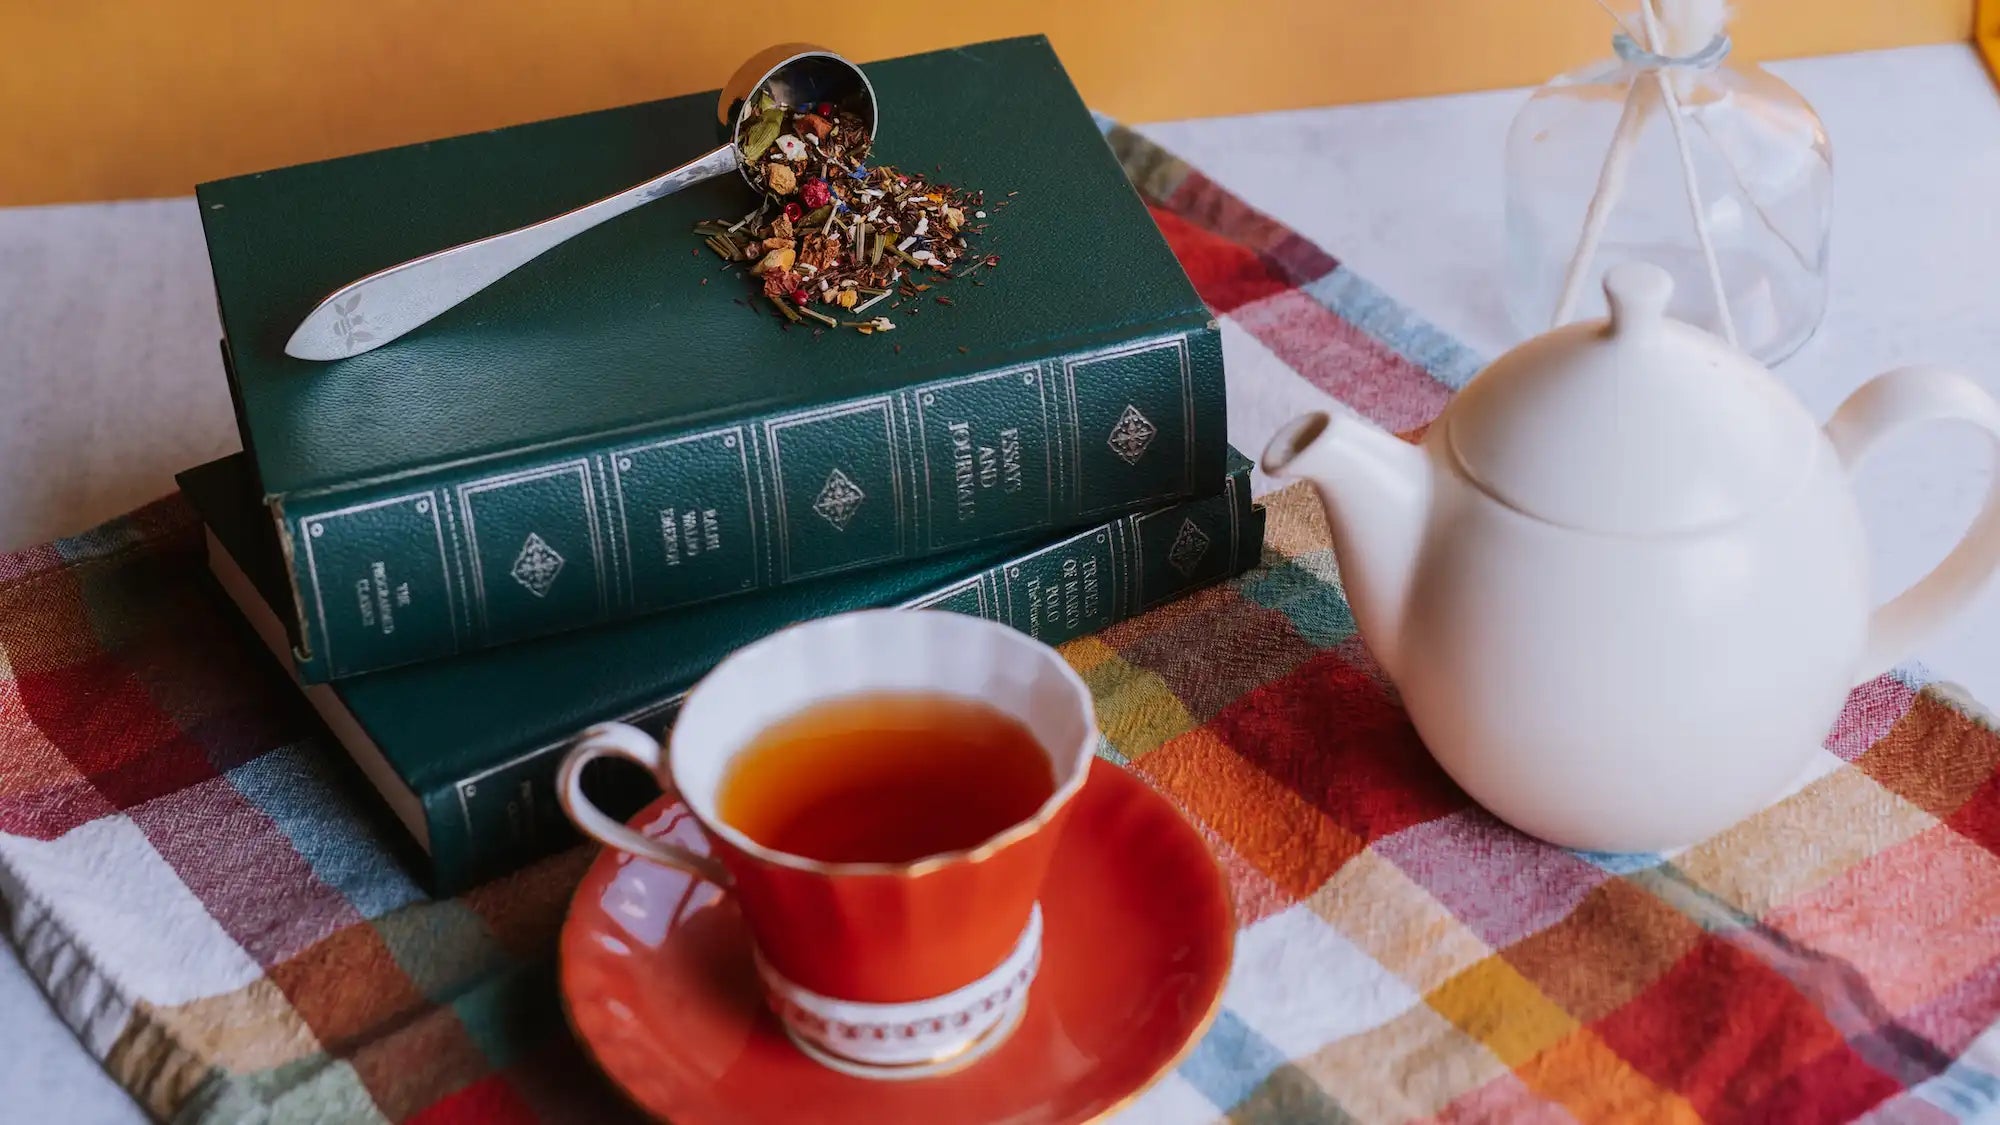 spirit of life rooibos herbal tea brewed in a tea cup and teapot with loose leaves spilled on a stack of books